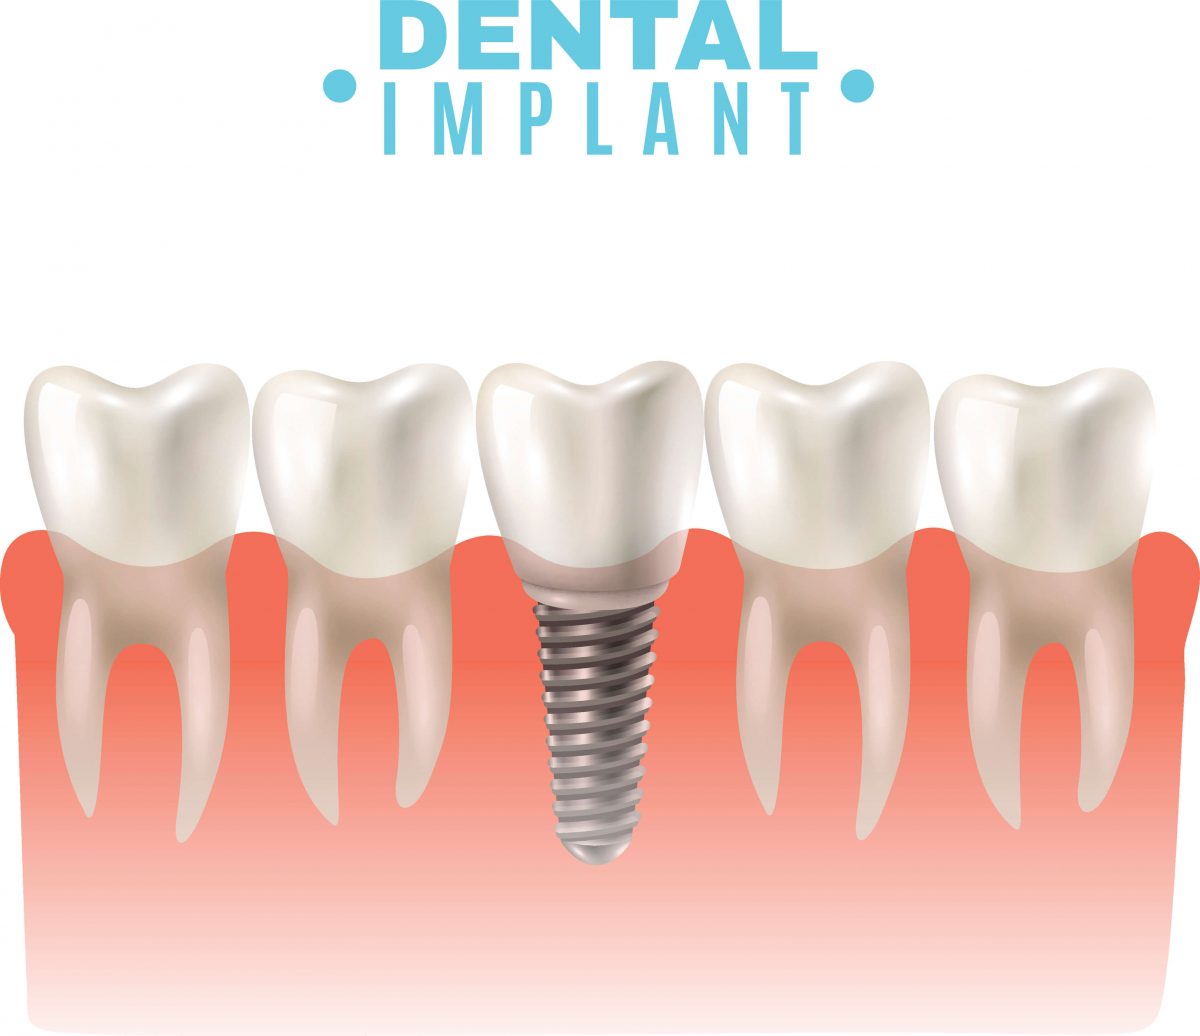 graphic of a single tooth dental implant